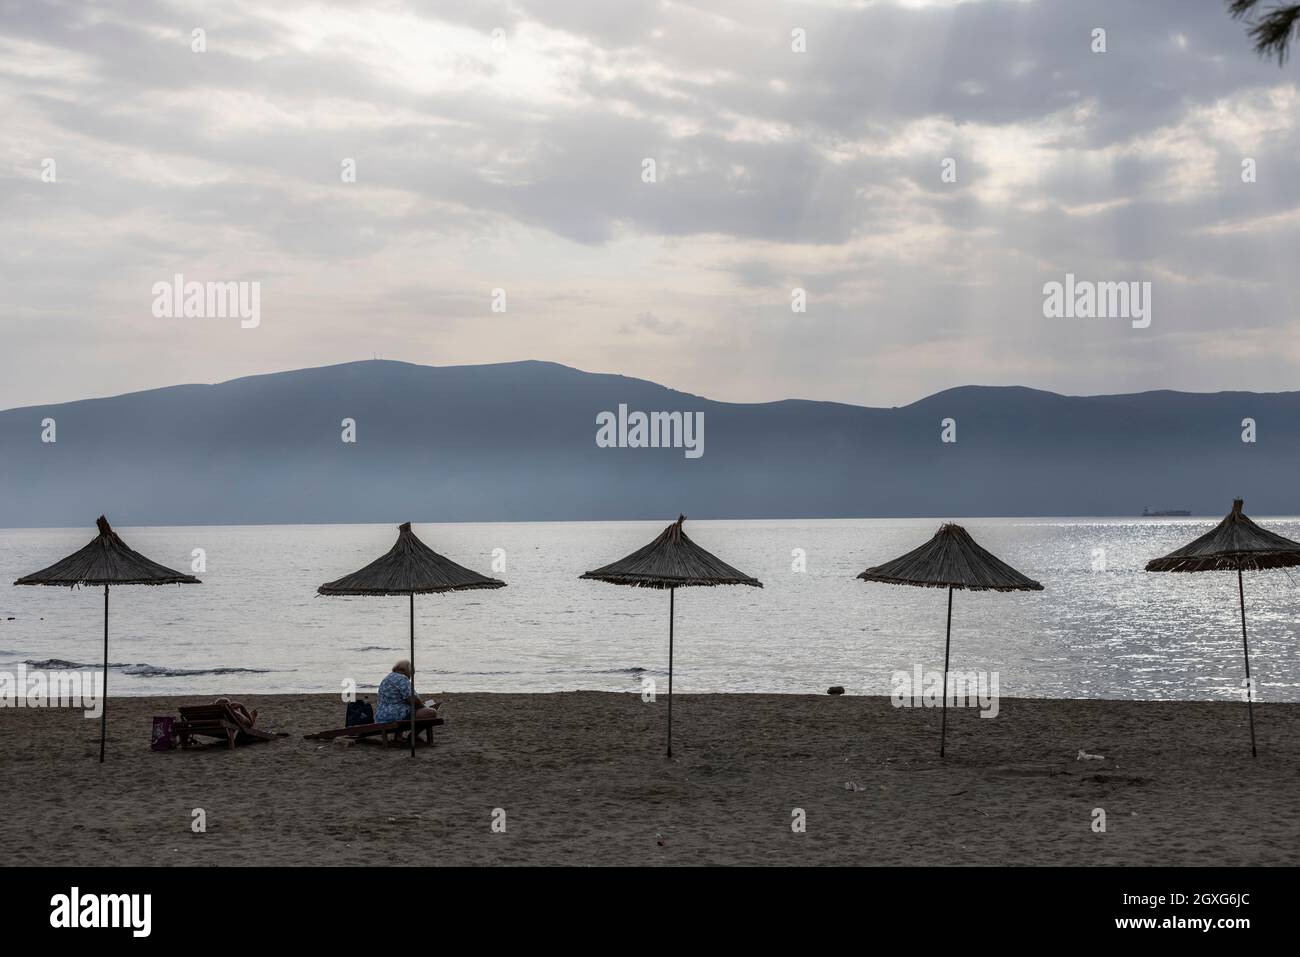 Vlore, situated on the Adriatic coast, the third-most populous city in Albania, Balkans, southeastern Europe. Stock Photo